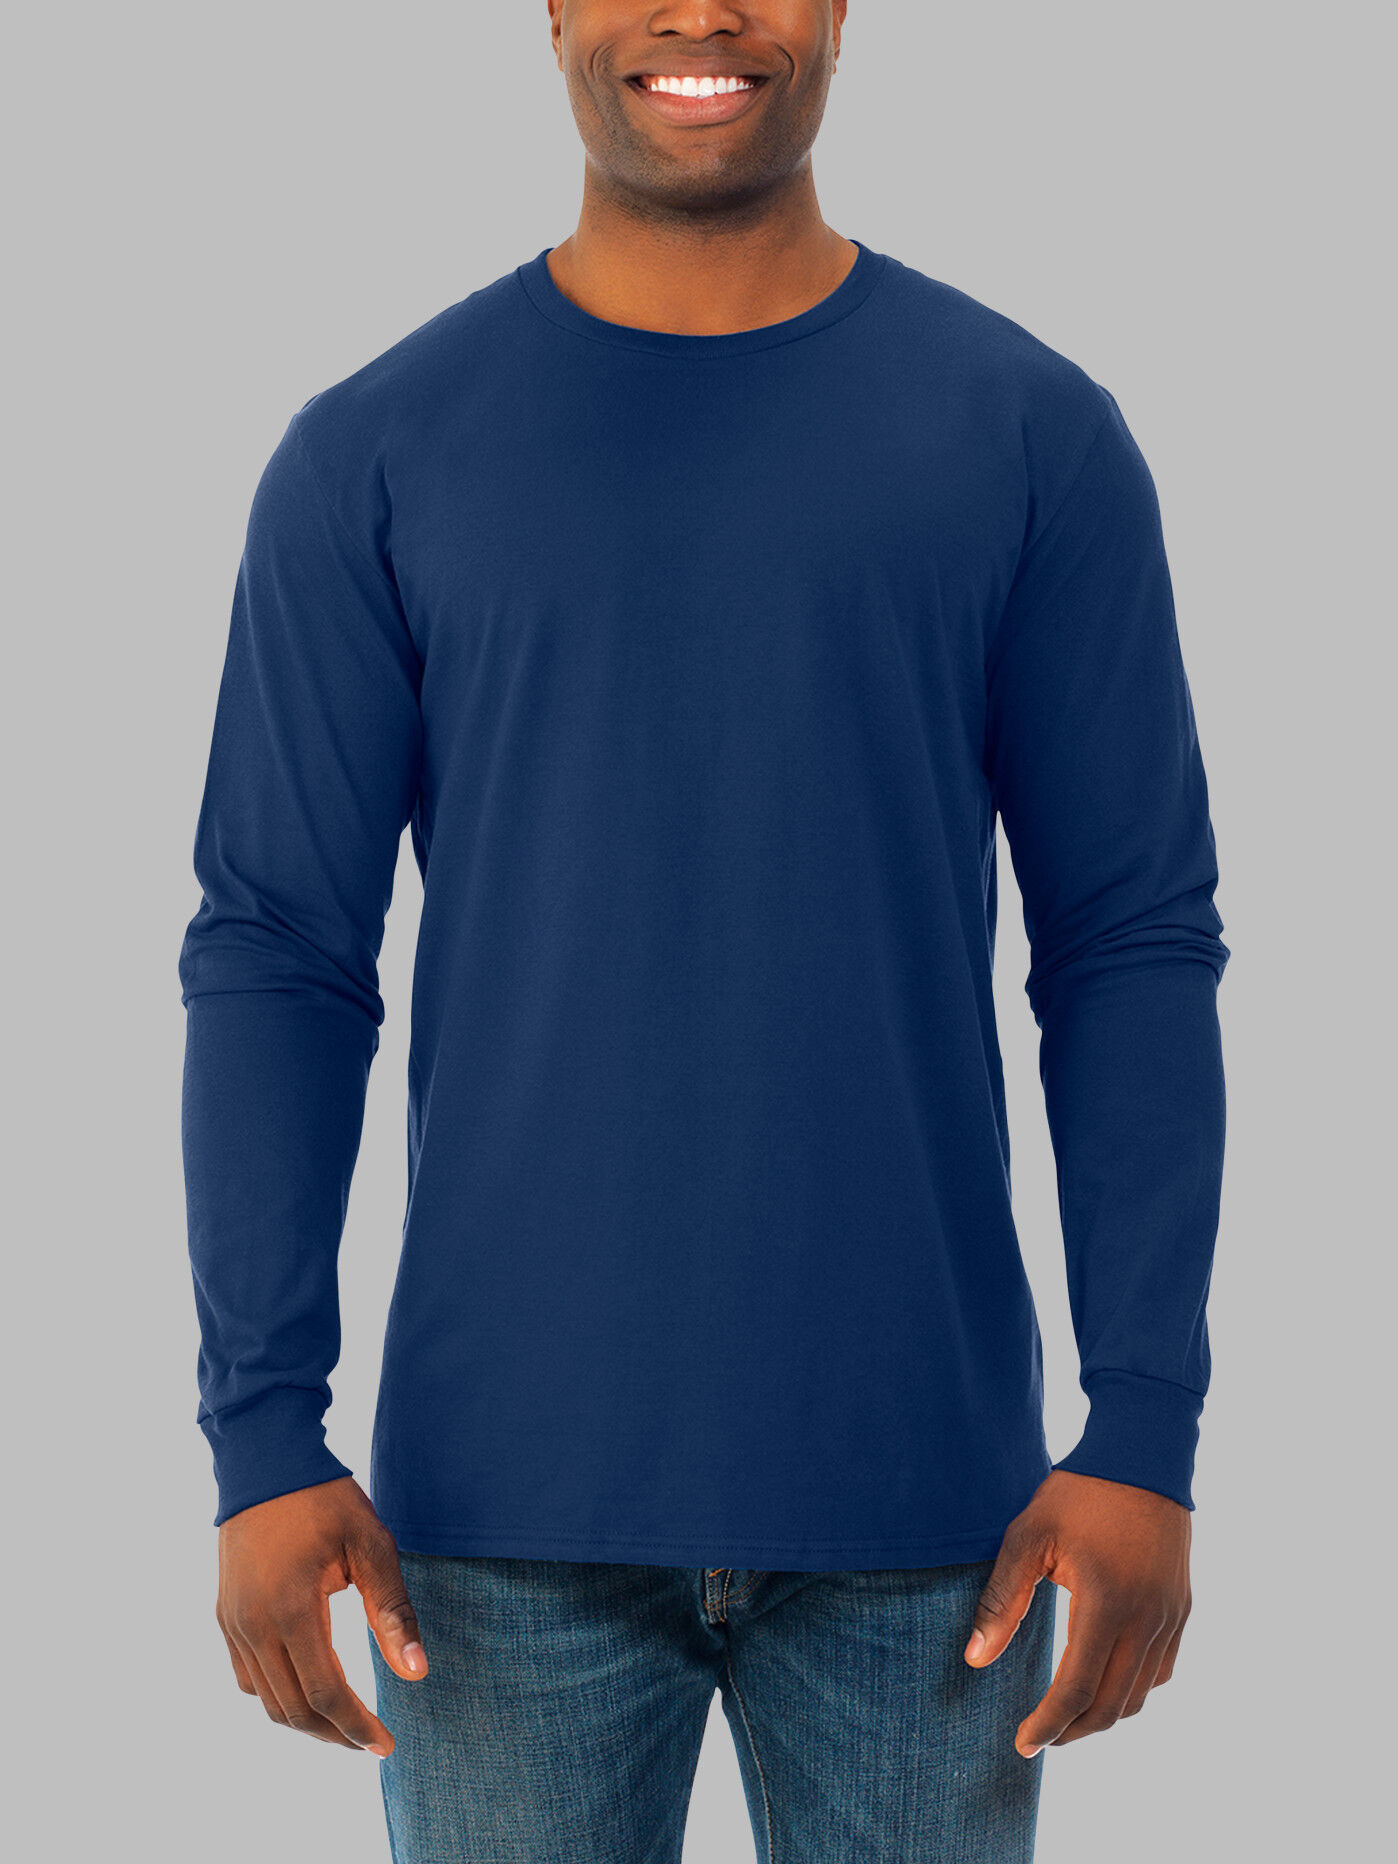 Soft Long Sleeve Crew Neck T-Shirt | Fruit of the Loom